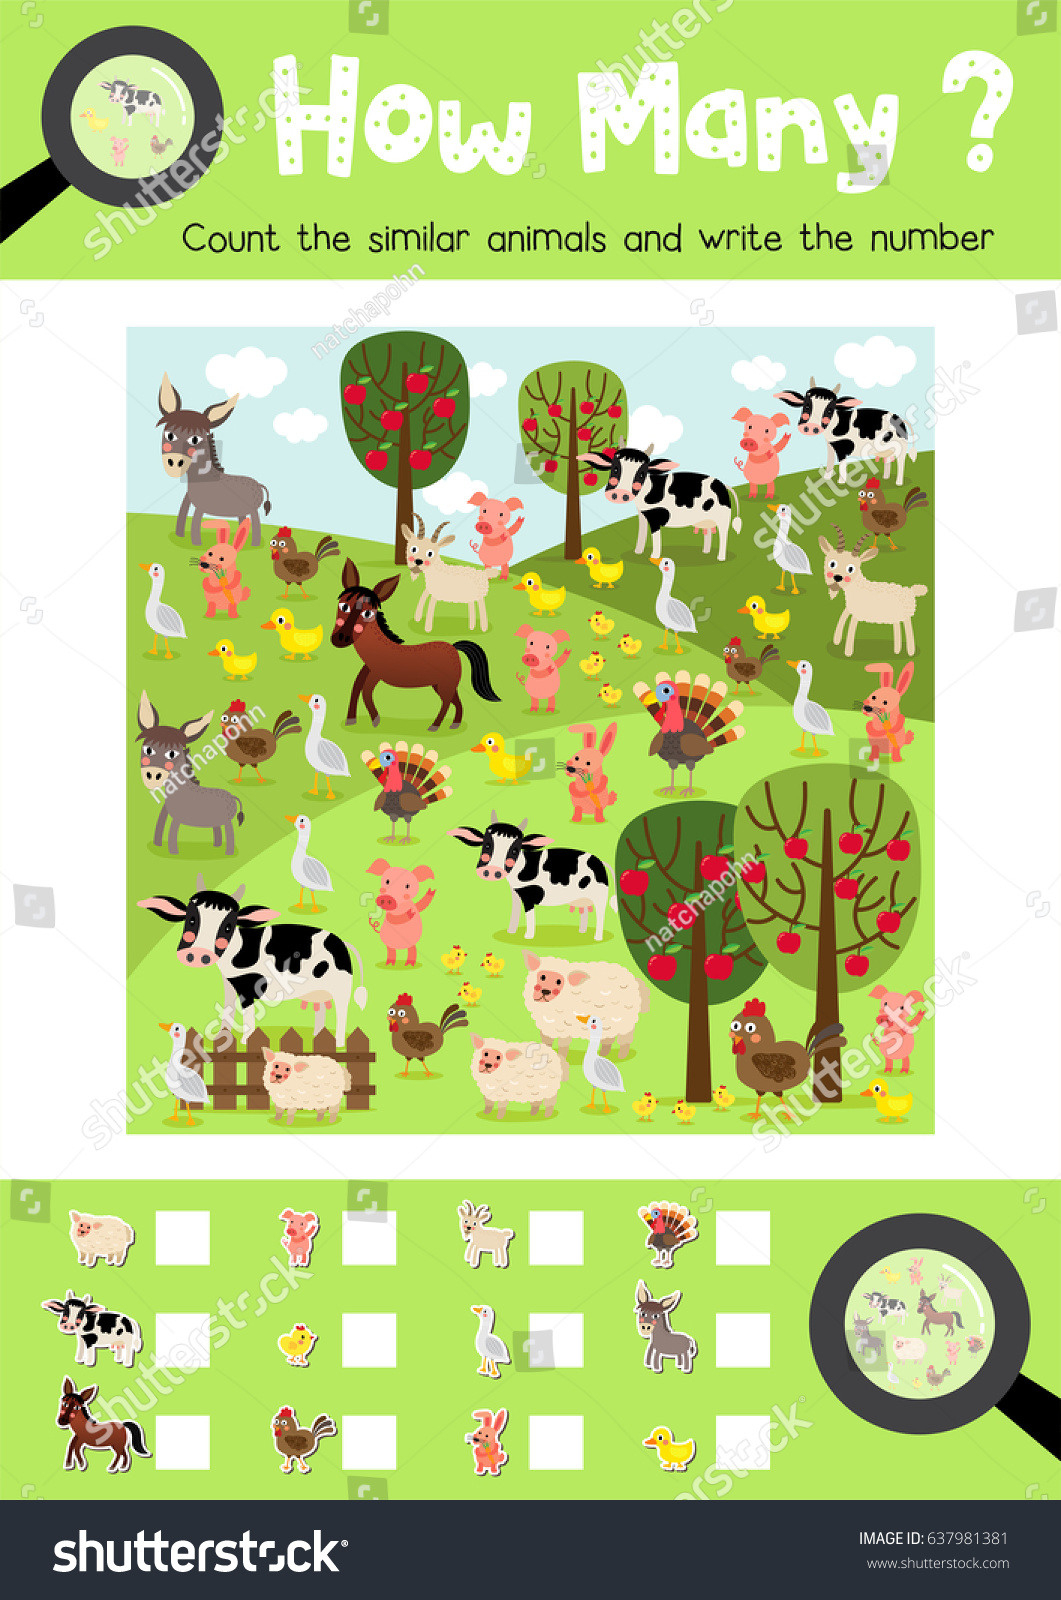 zoo-and-farm-animals-interactive-worksheet-farm-and-zoo-animals-worksheet-free-esl-printable